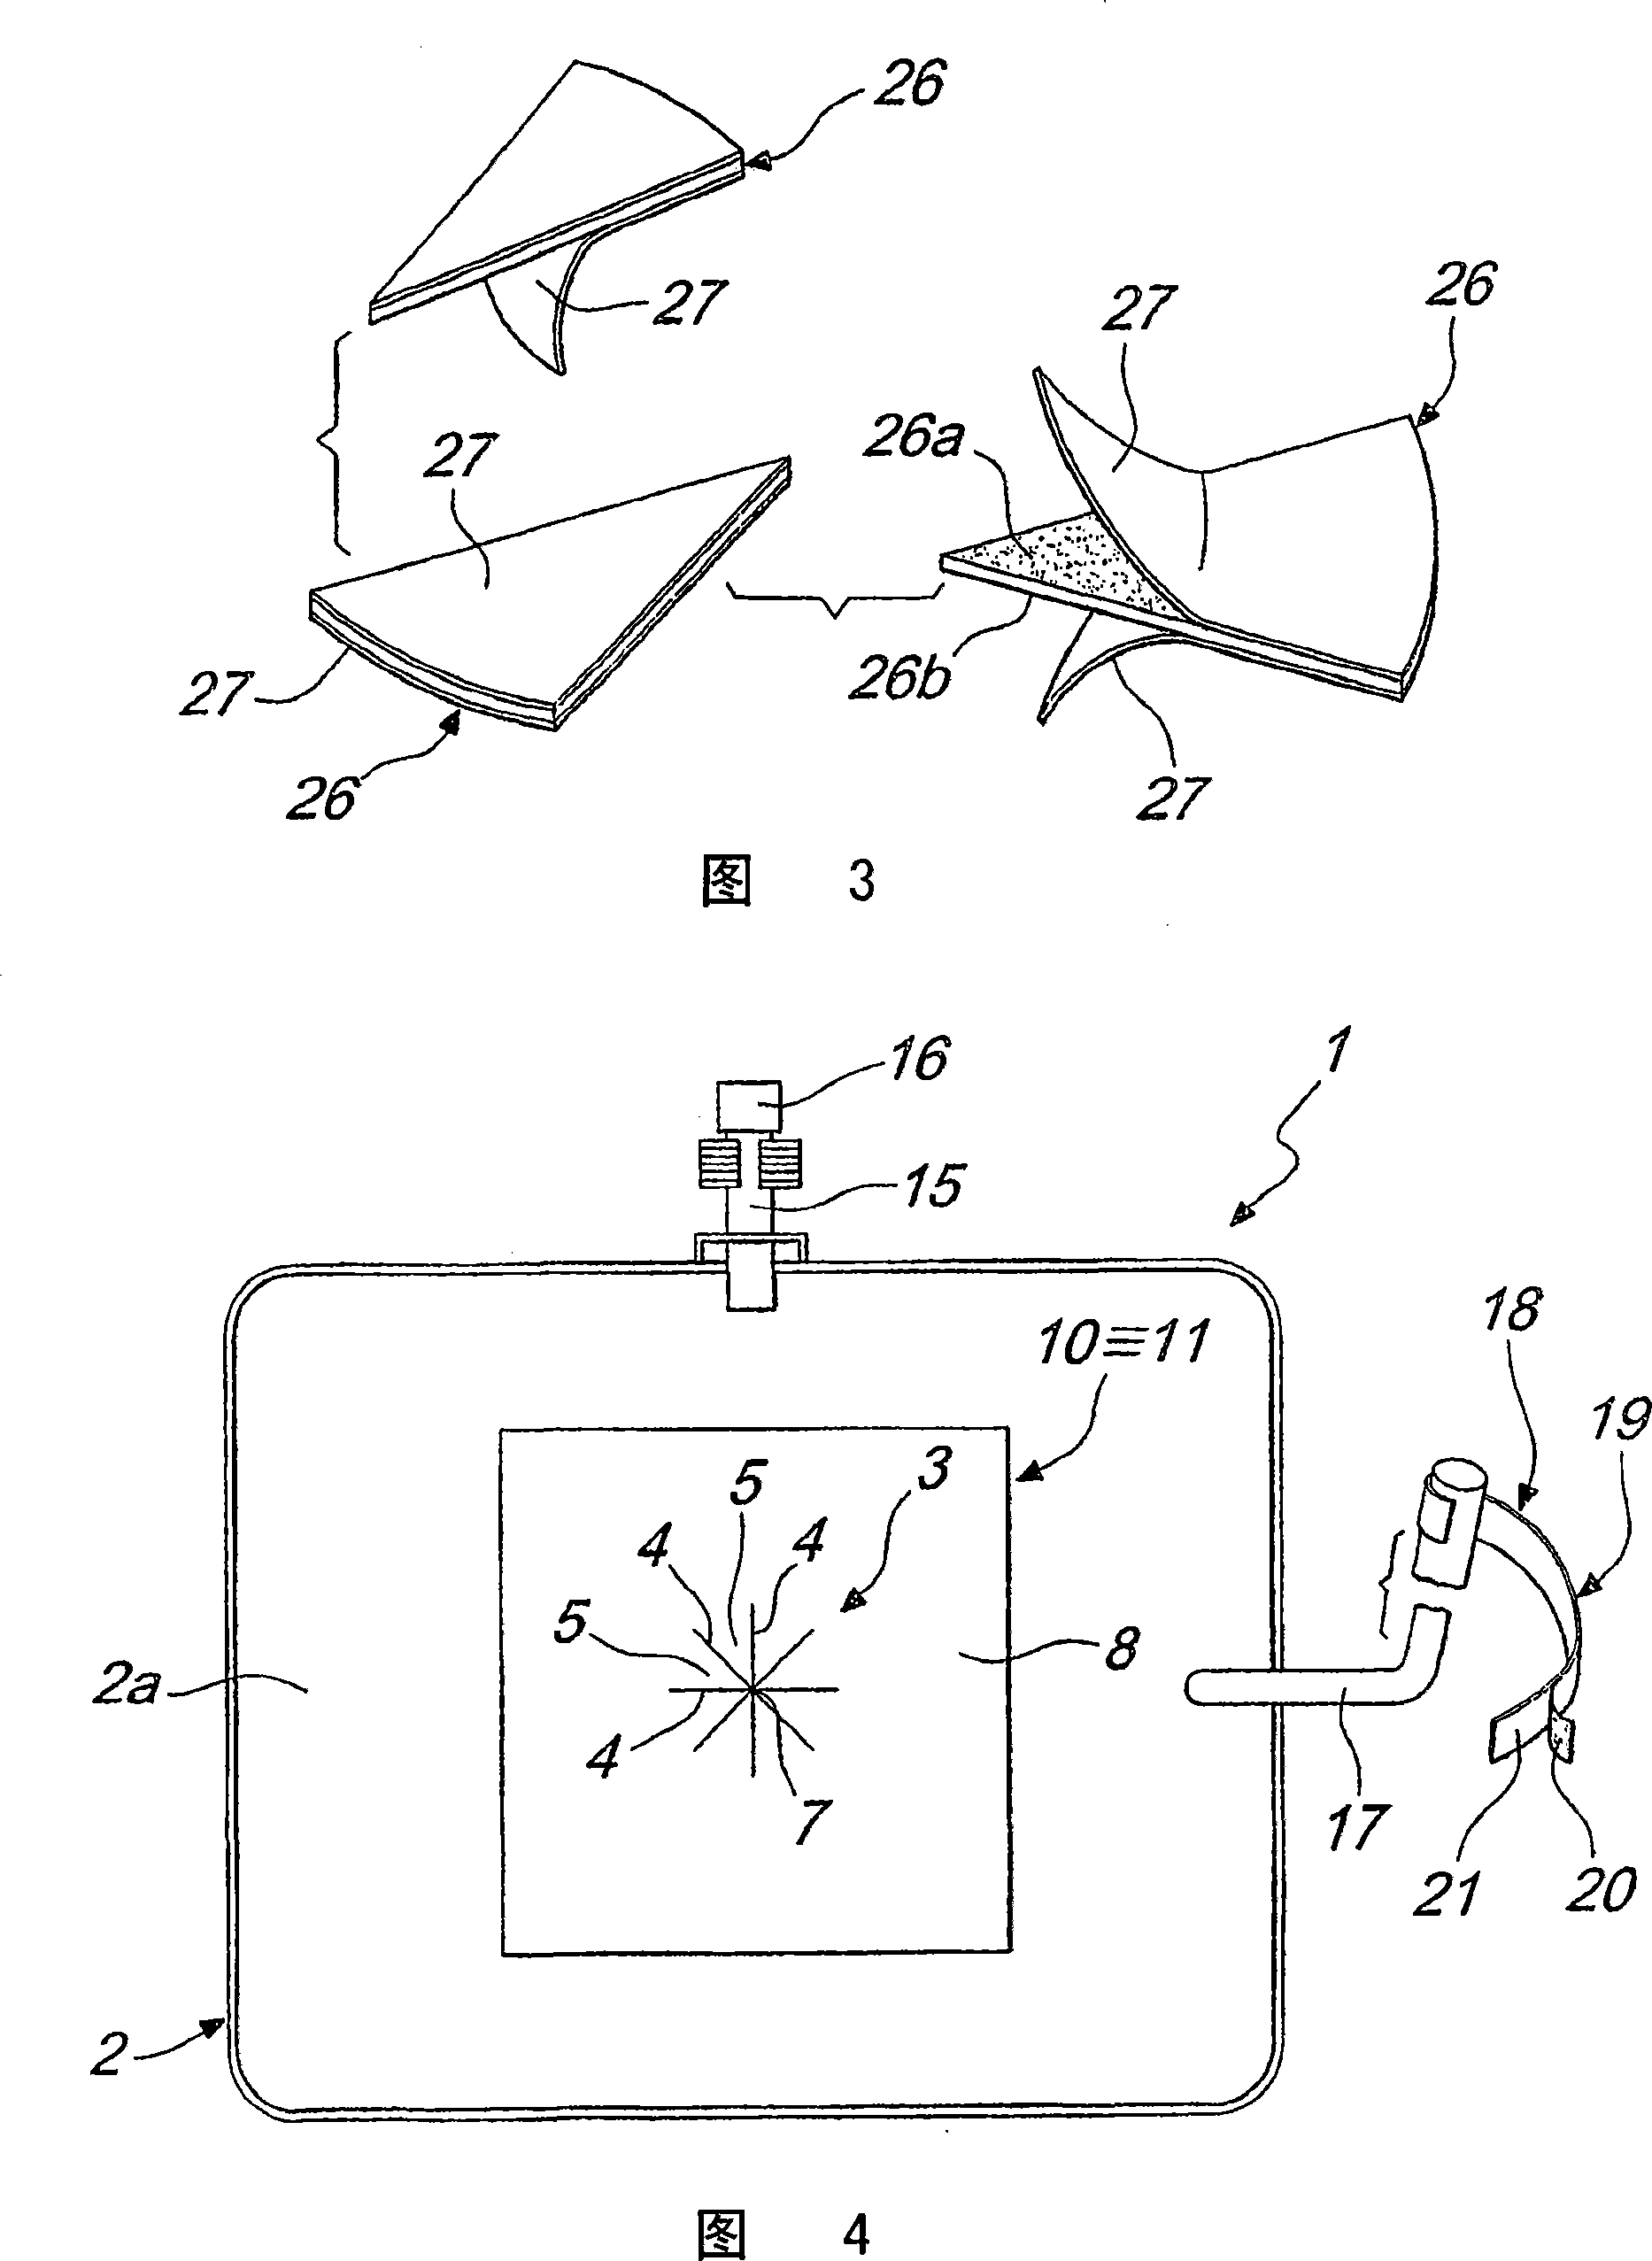 Container for collecting excretions, draining collections, purging ostomies or the like